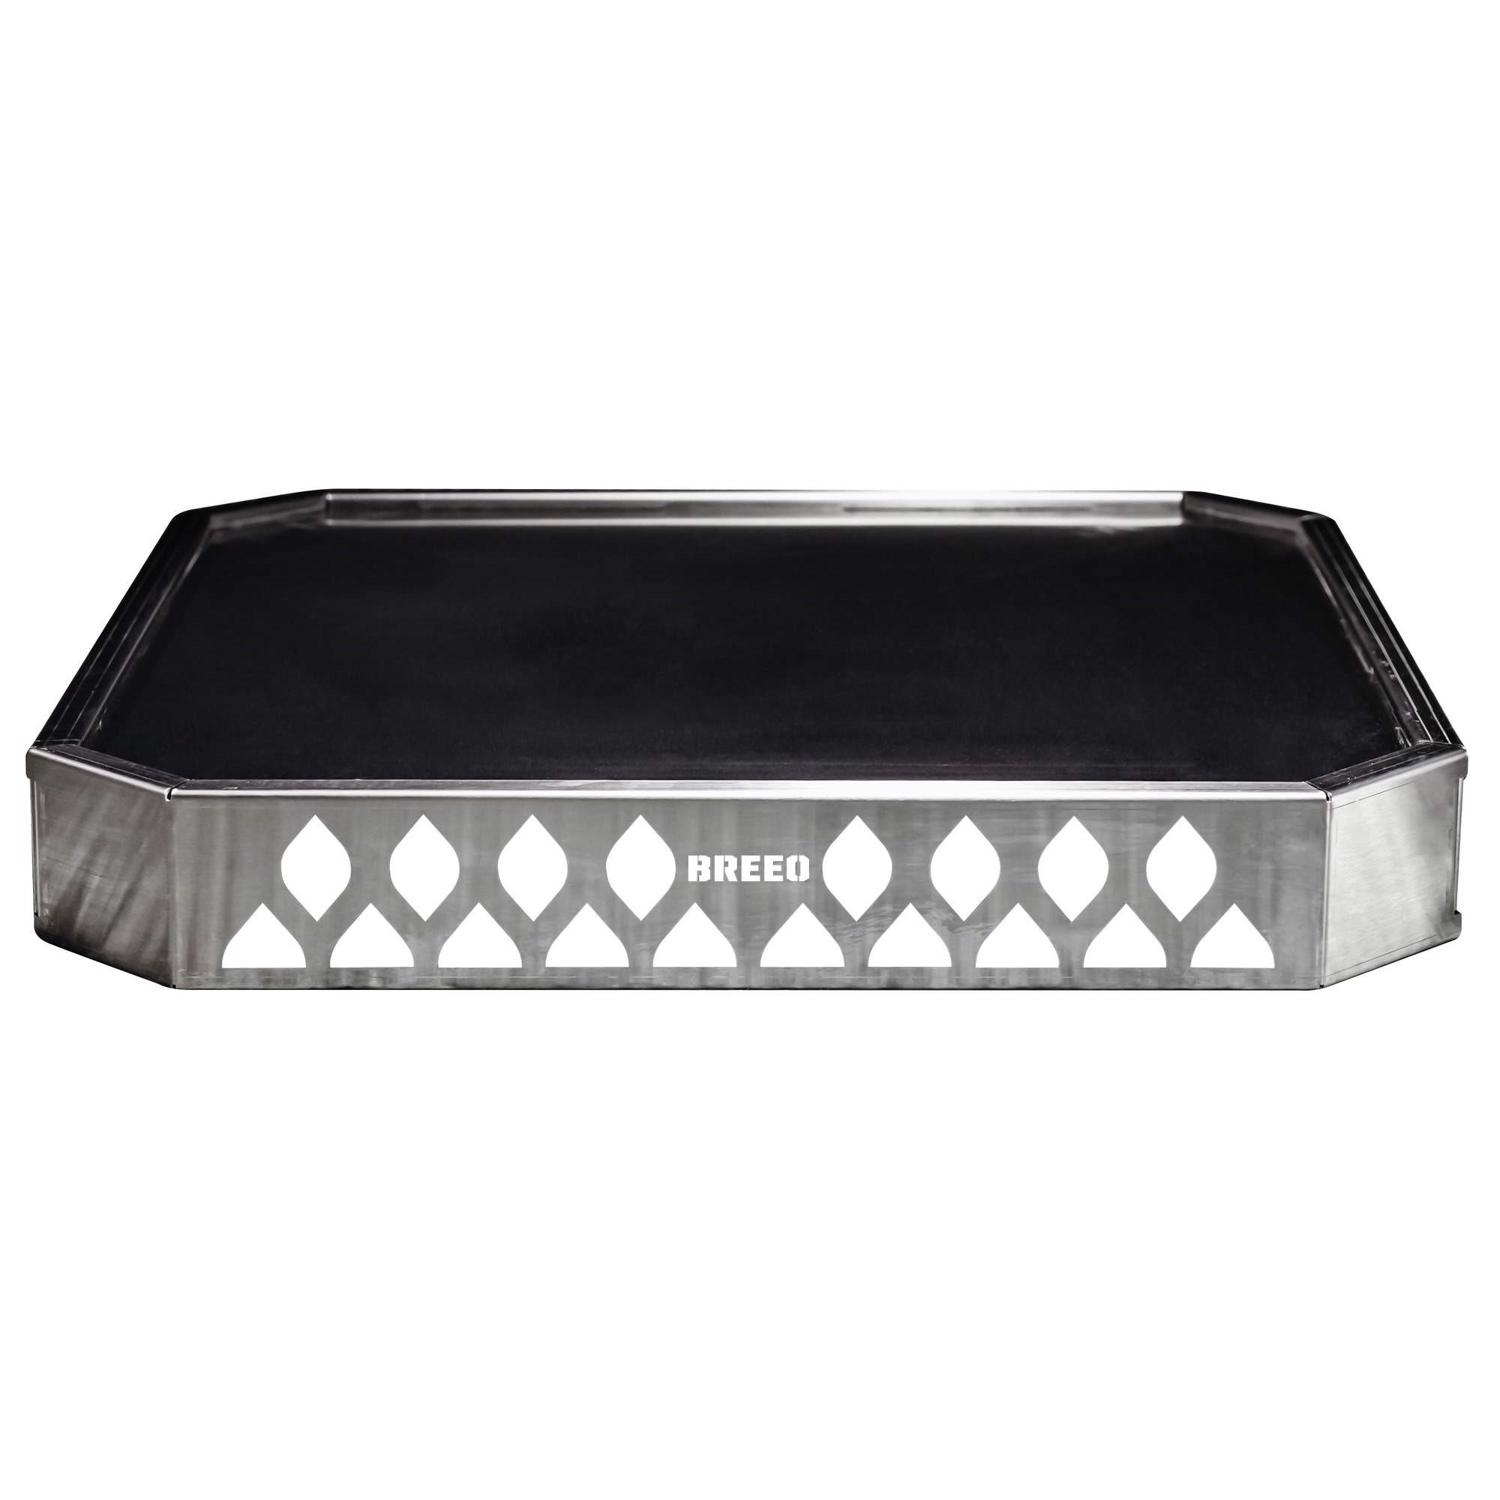 Photos - Other Garden Equipment Breeo X Series 24 Stainless Steel Fire Pit Base 3.5 in. H X 24 in. W X 24